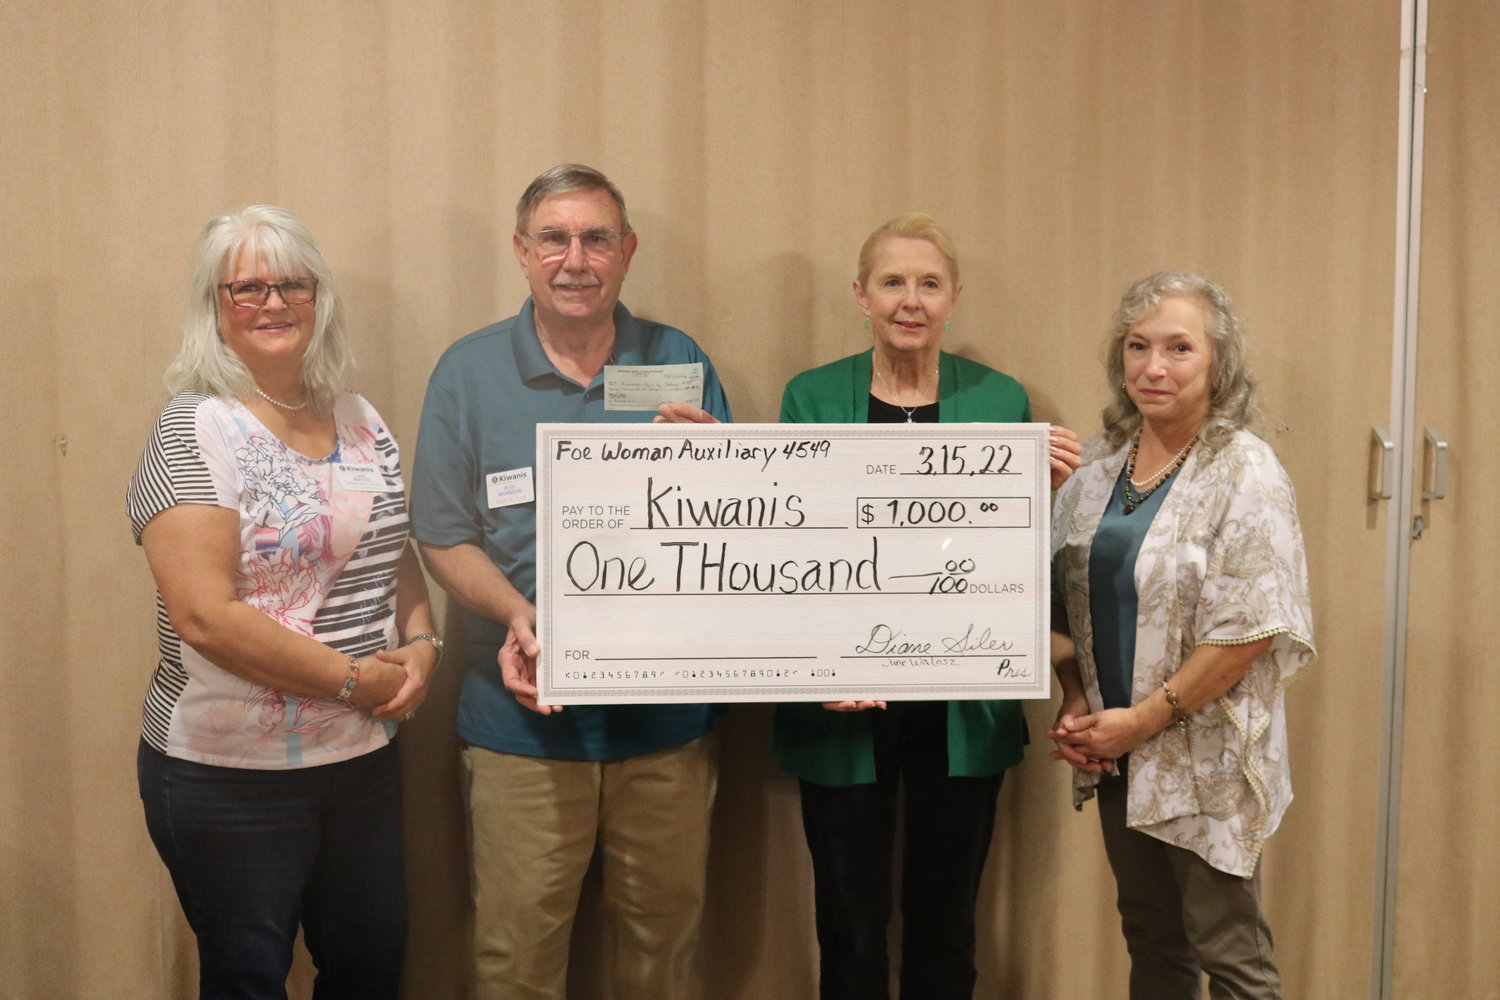 From left, Lady Auxiliary and Kiwanian June Walosz, Kiwanis Club of Foley President Russ Morrison, FOE Ladies Auxiliary President Diane Siler, and Past President Sandy Phonessa. The FOE Ladies Auxiliary presented a donation of $1,000 to the Foley Kiwanis Club on March 15.